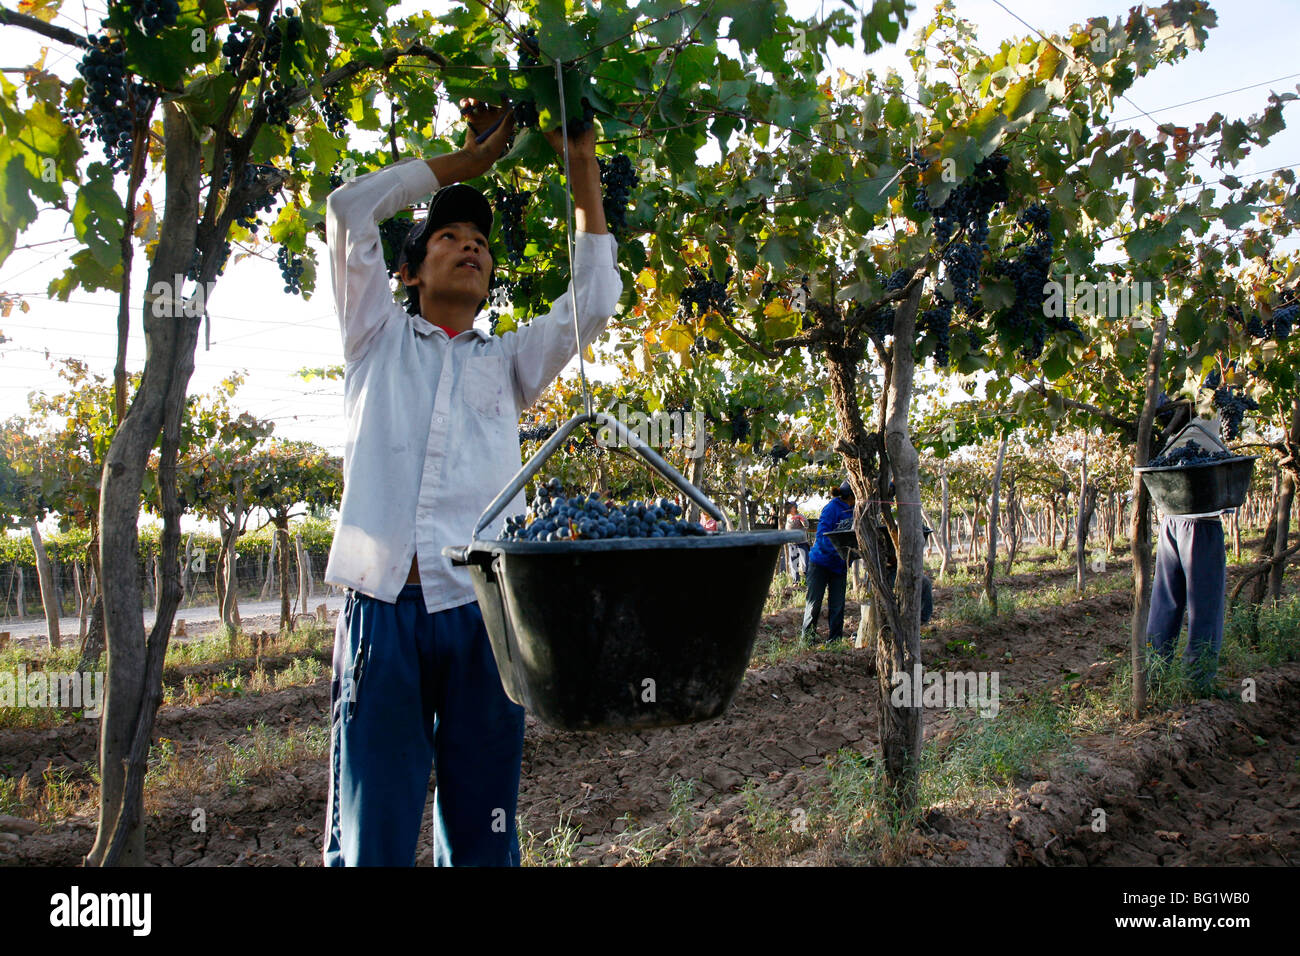 Man working at the vineyard during the harvest time, Mendoza, Argentina, South America Stock Photo